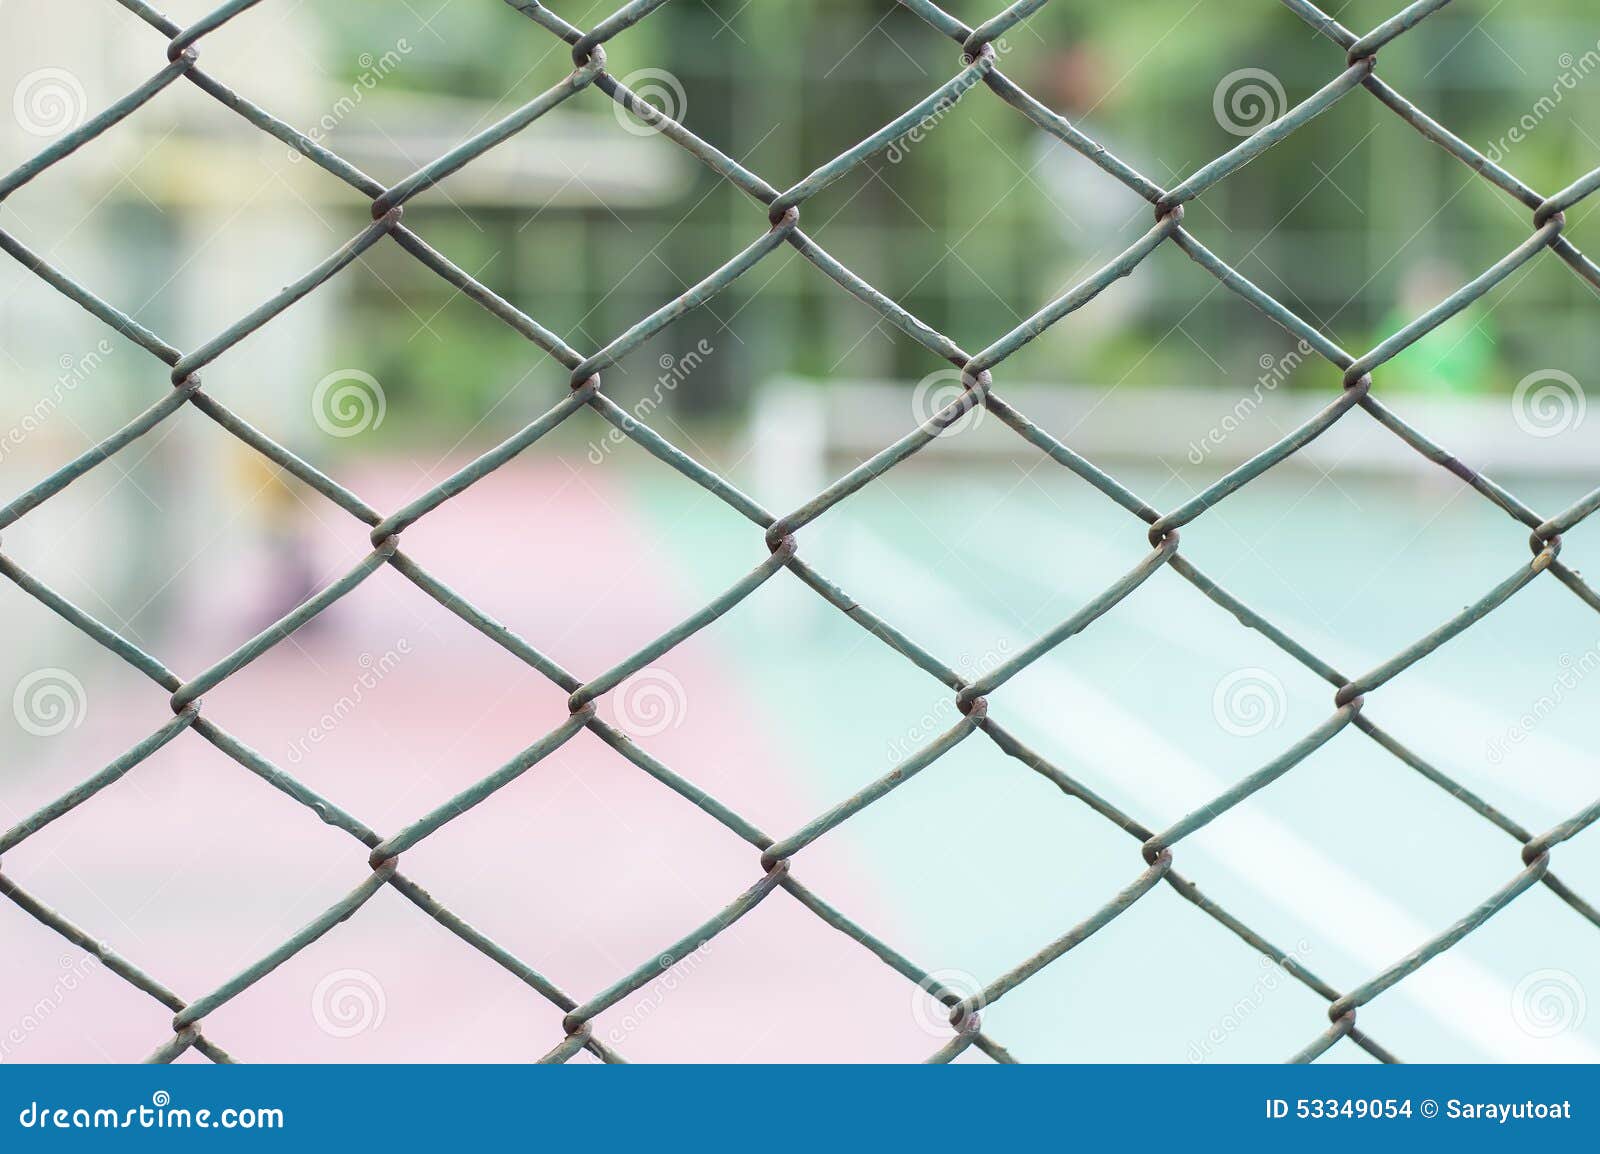 Metal Mesh Wire Fence With Tennis Court Stock Photo - Image of breach ...
